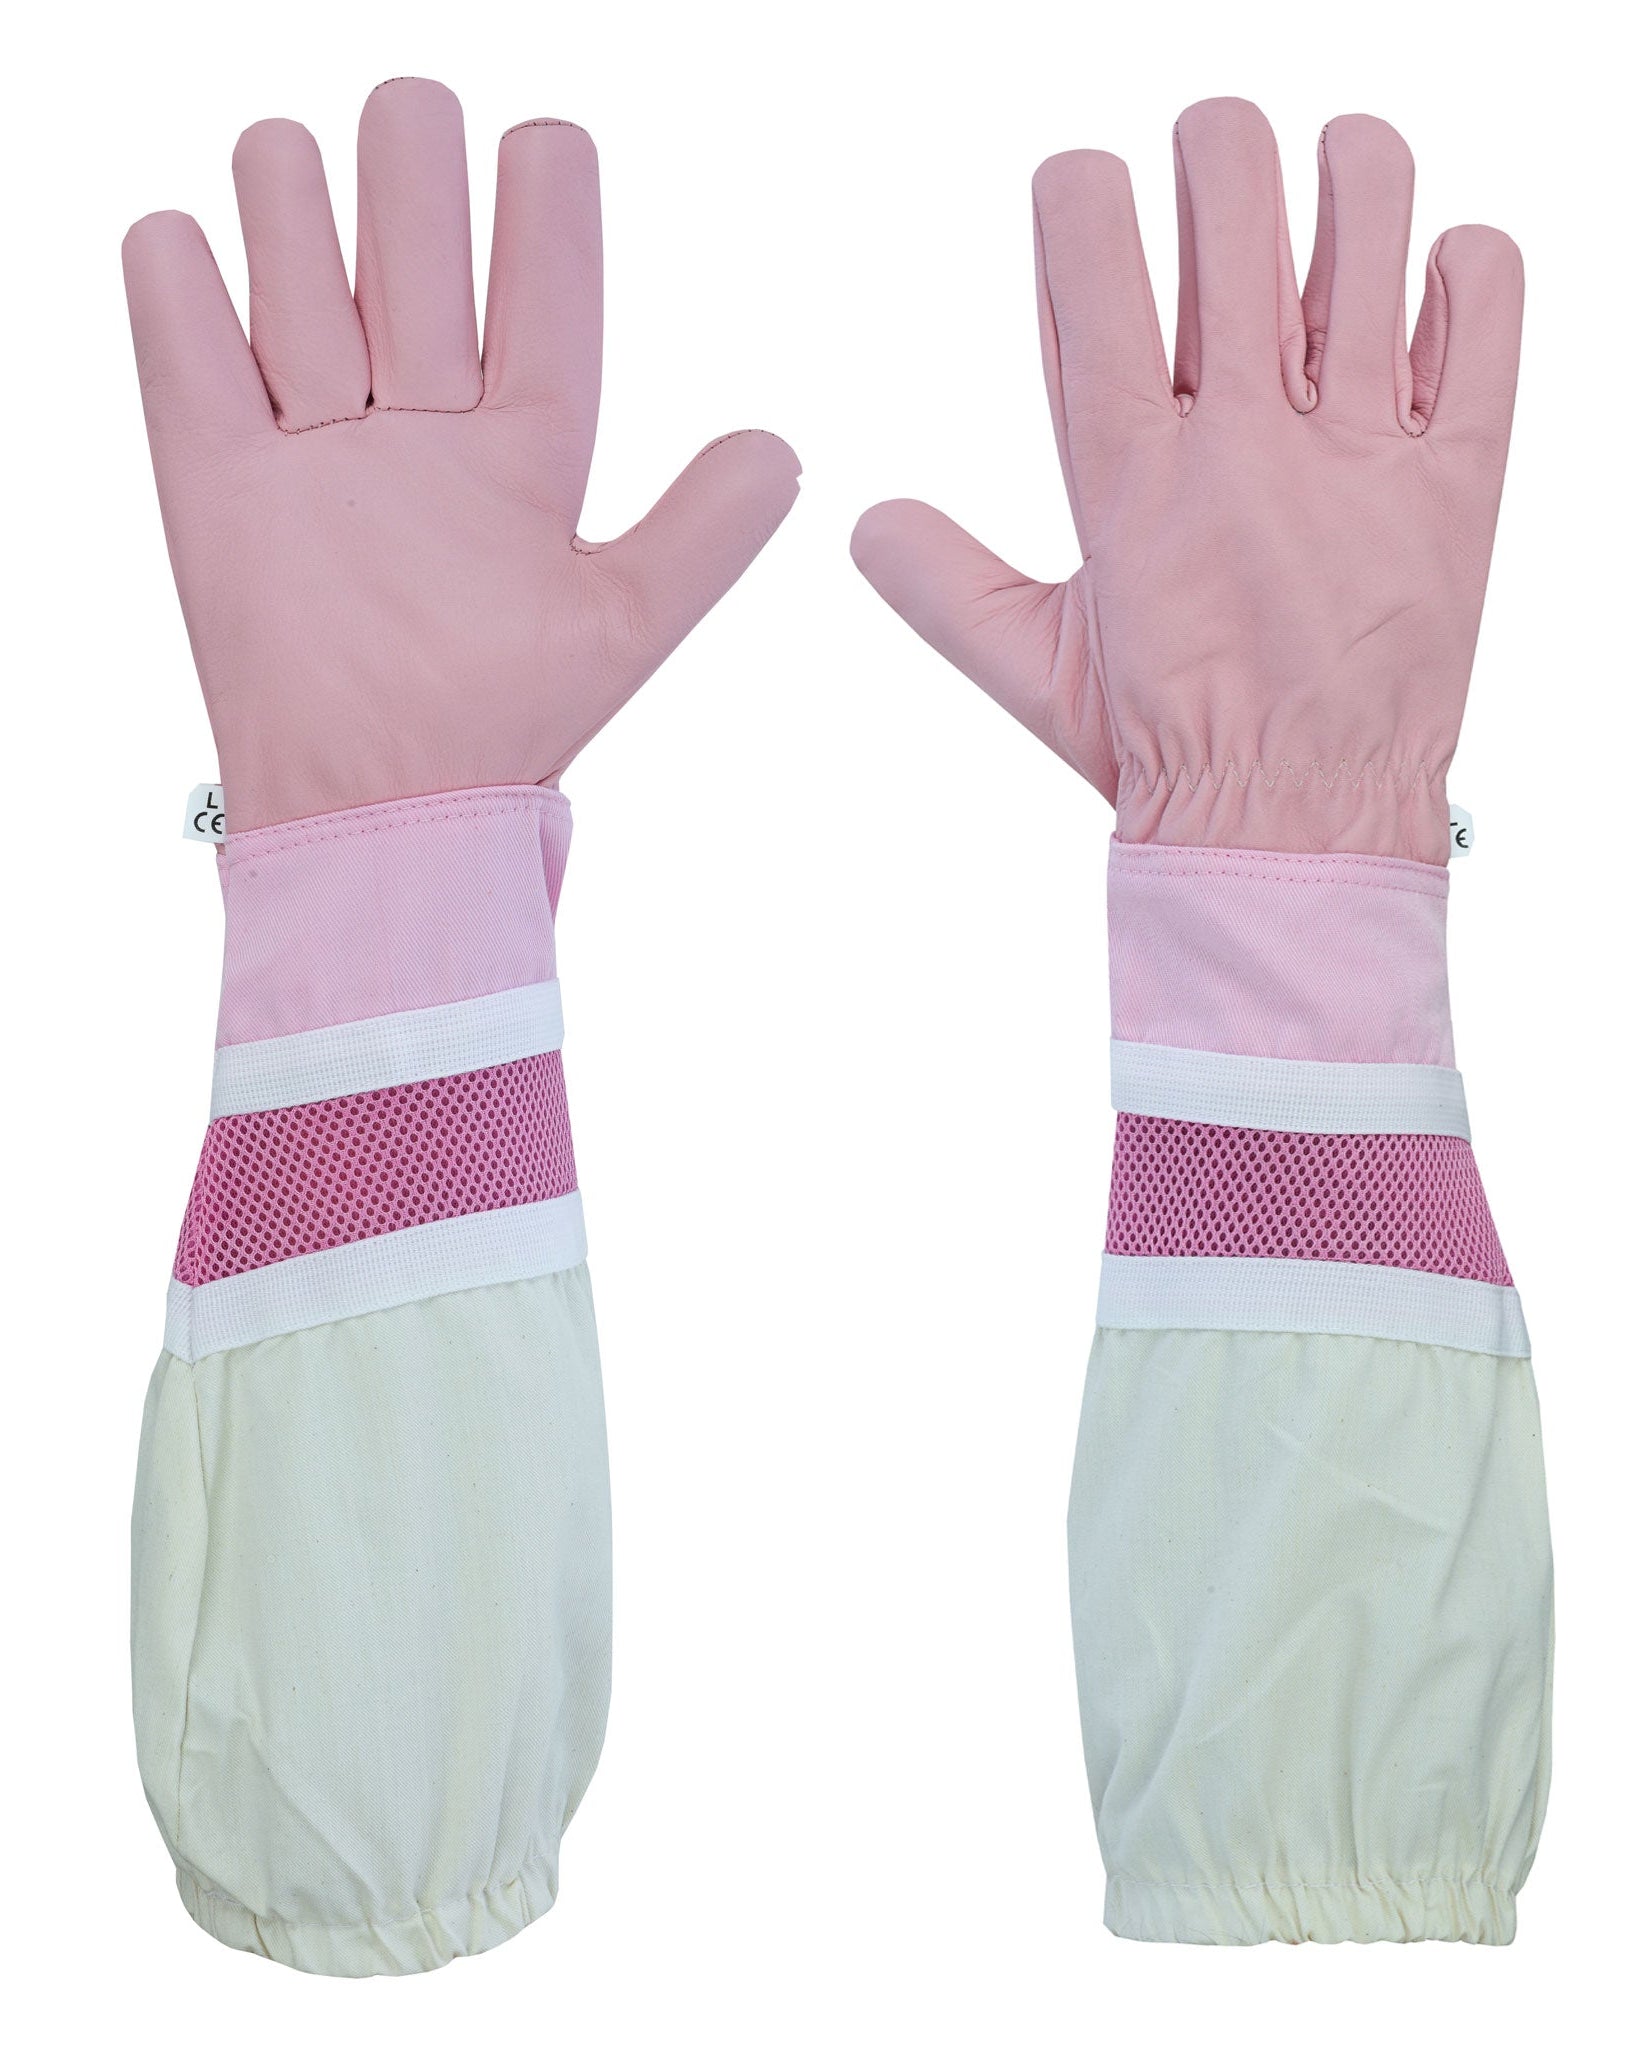 See the gloves in action â€“ OZ ARMOUR Pink Cow Hide Ventilated Gloves providing superior protection during use.